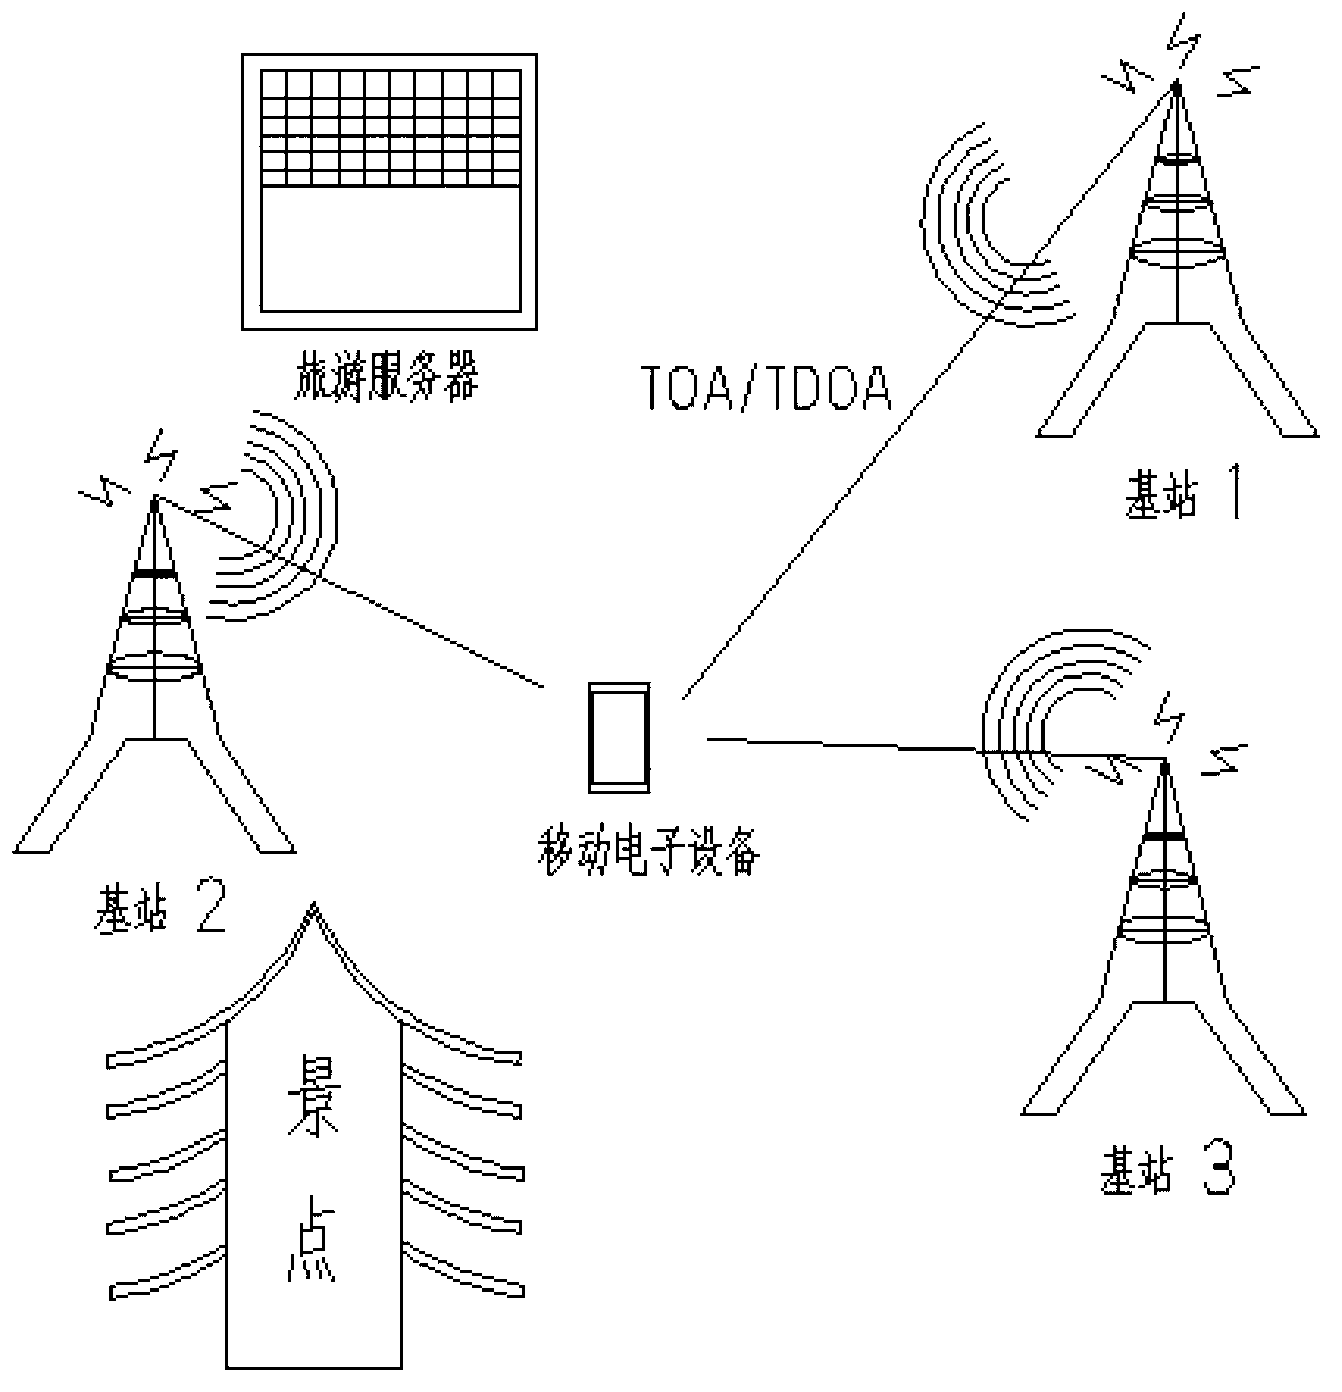 Self-service electronic tourist guide system based on mobile phone base station location